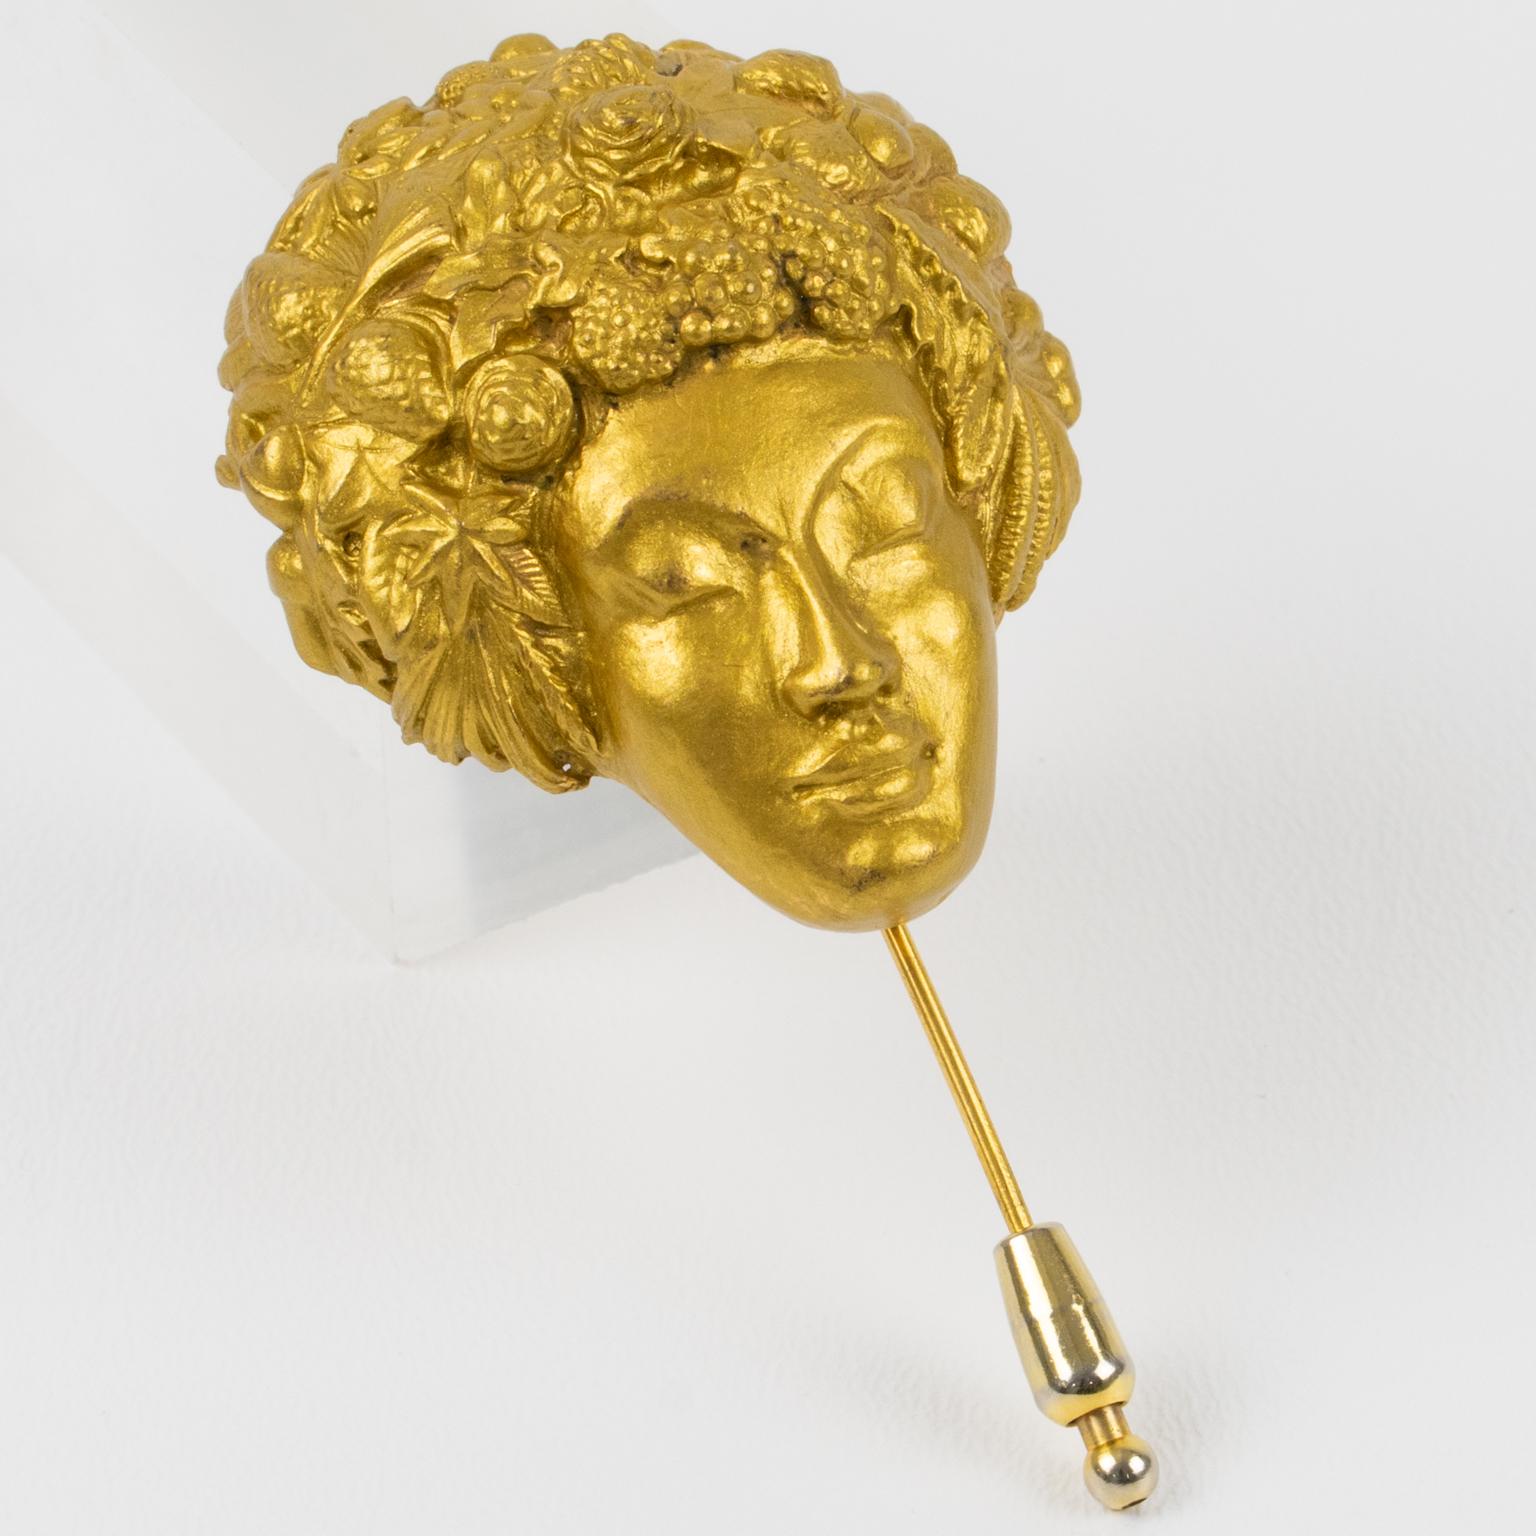 Isabel Canovas, Paris, created this magnificent gilded bronze pin brooch. It features a face mask with carving and refined detailing. The pin has a long stick closing clasp at the back with the engraved signature 